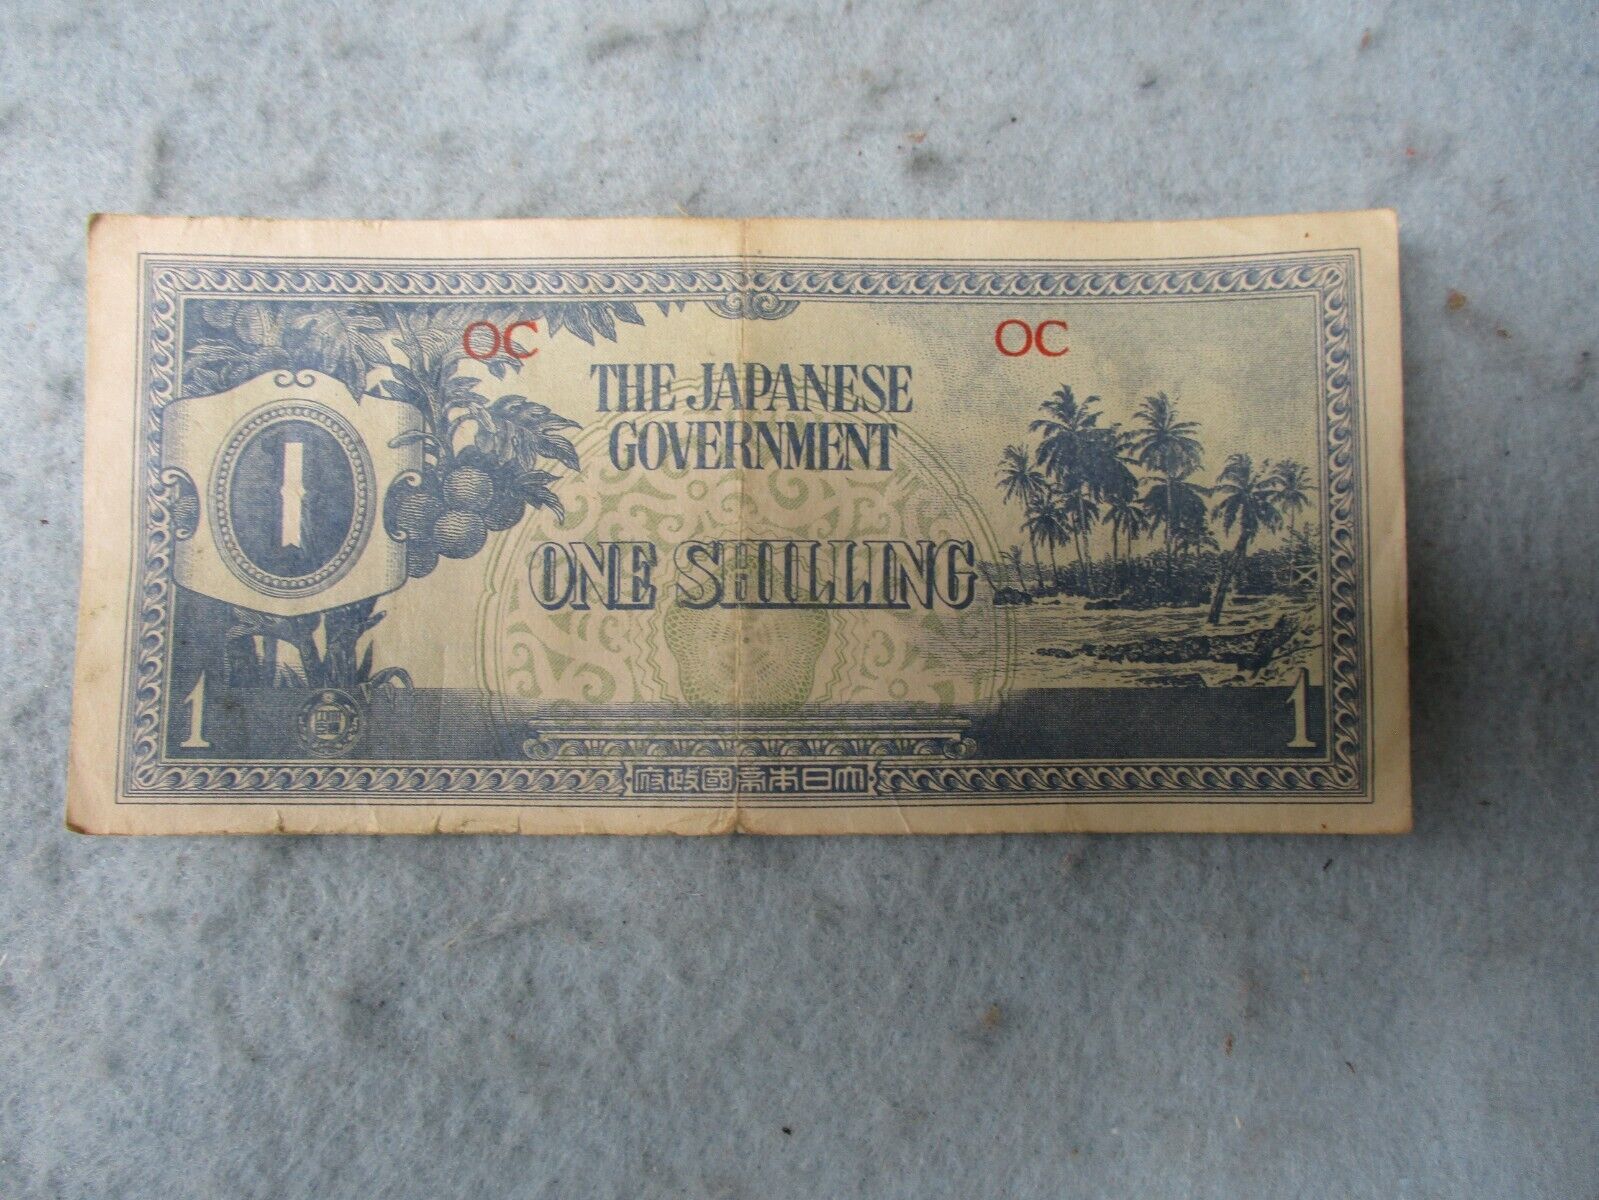 WWII Japanese Occupation Currency 1 Shilling Bill Oceania Australia New Guinea